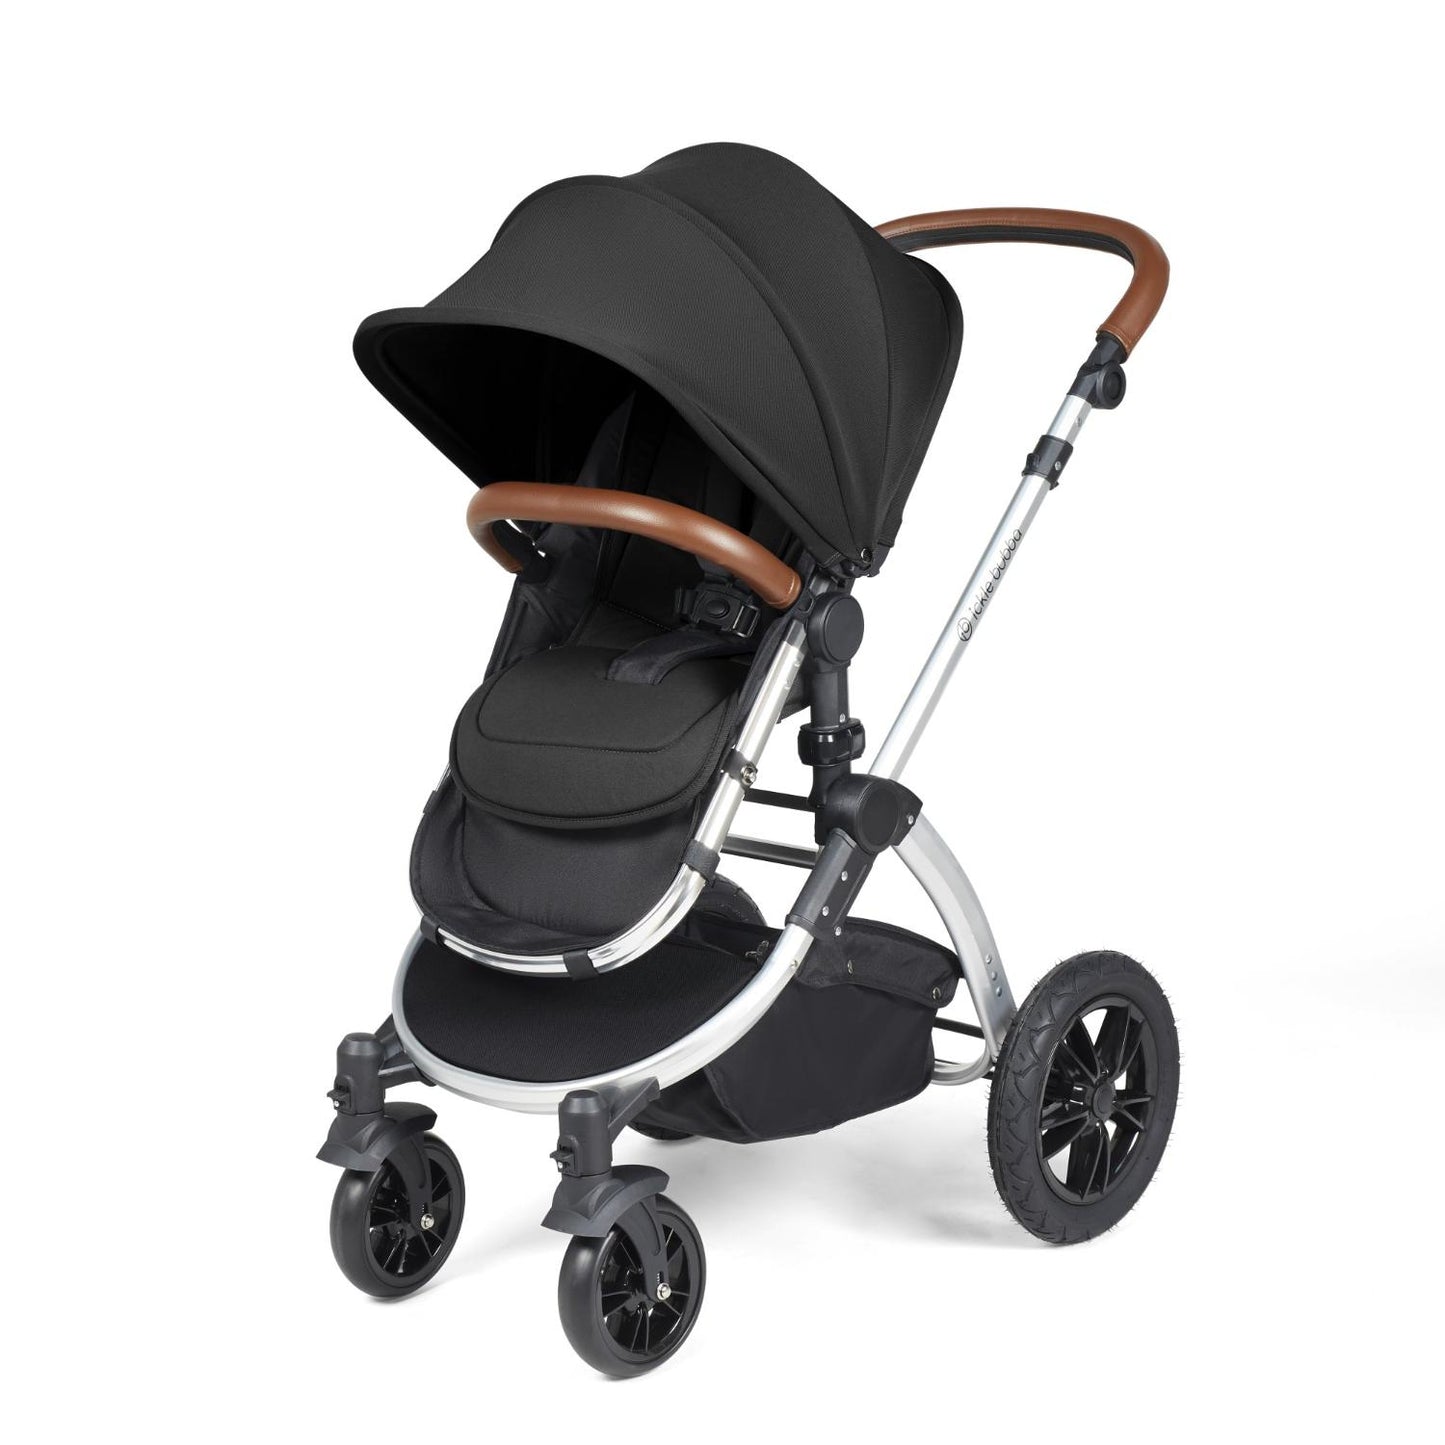 Ickle Bubba Stomp Luxe Pushchair with seat unit attached in Midnight black colour with silver chassis and tan handle